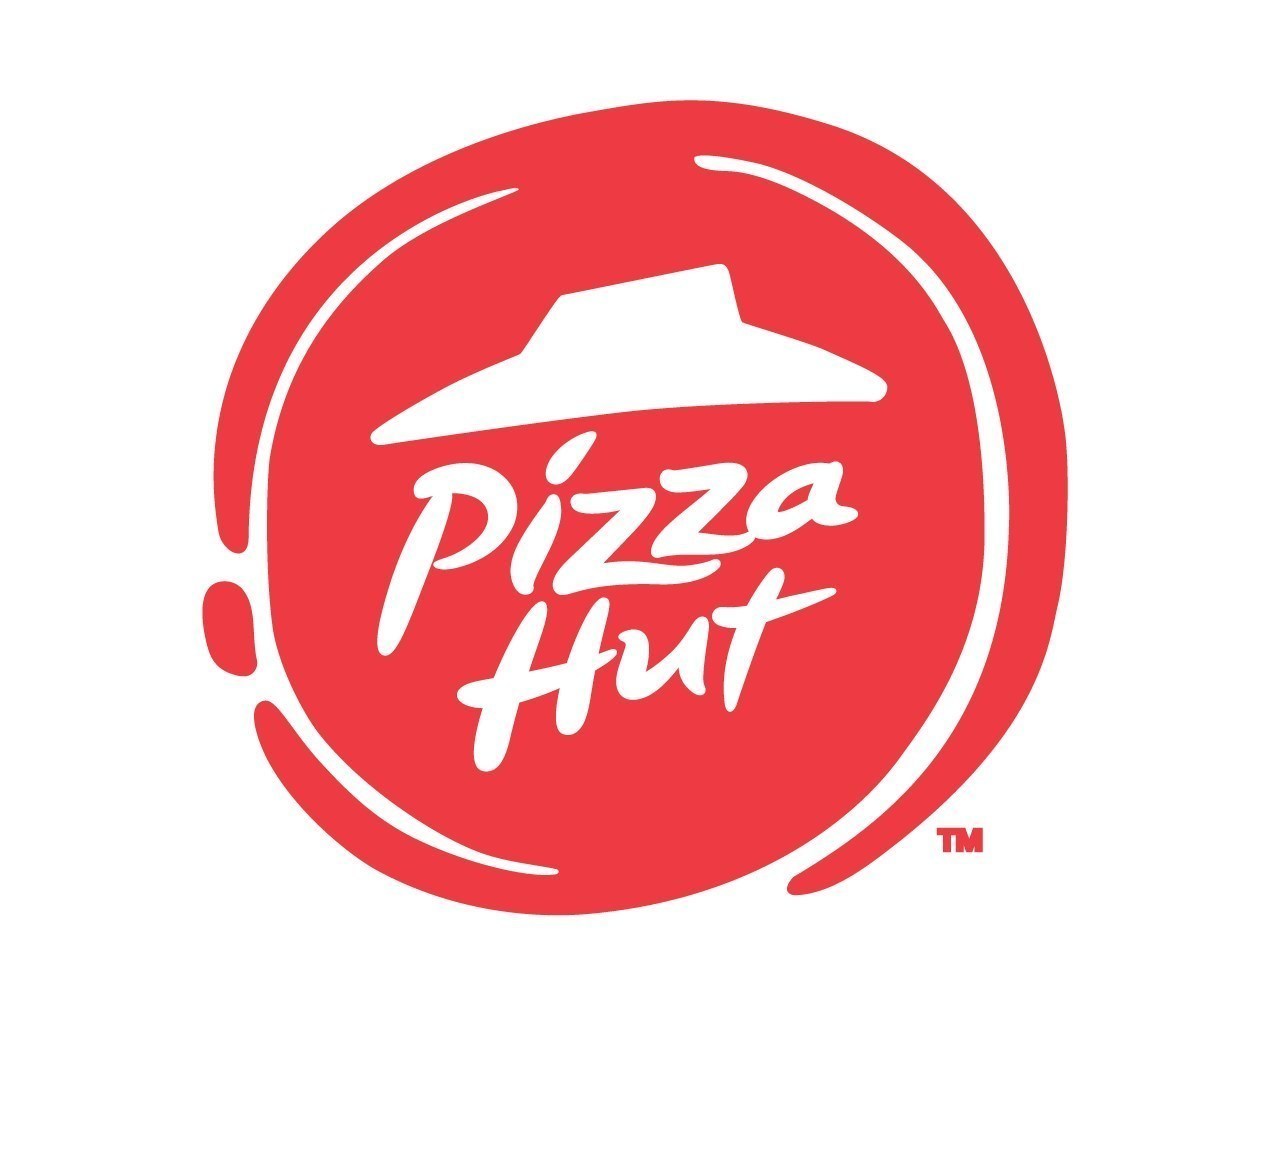 Pizza Hut is back on campus for its fourth season as the Official Pizza Sponsor of ESPN’s College GameDay, working with host Maria Taylor to identify and interview the schools’ most passionate fans on air each week. Pizza Hut will also be on-site for each broadcast with its “House of Pi,” offering a lounge and plenty of swag for fans to enjoy during the show. (PRNewsfoto/Pizza Hut)